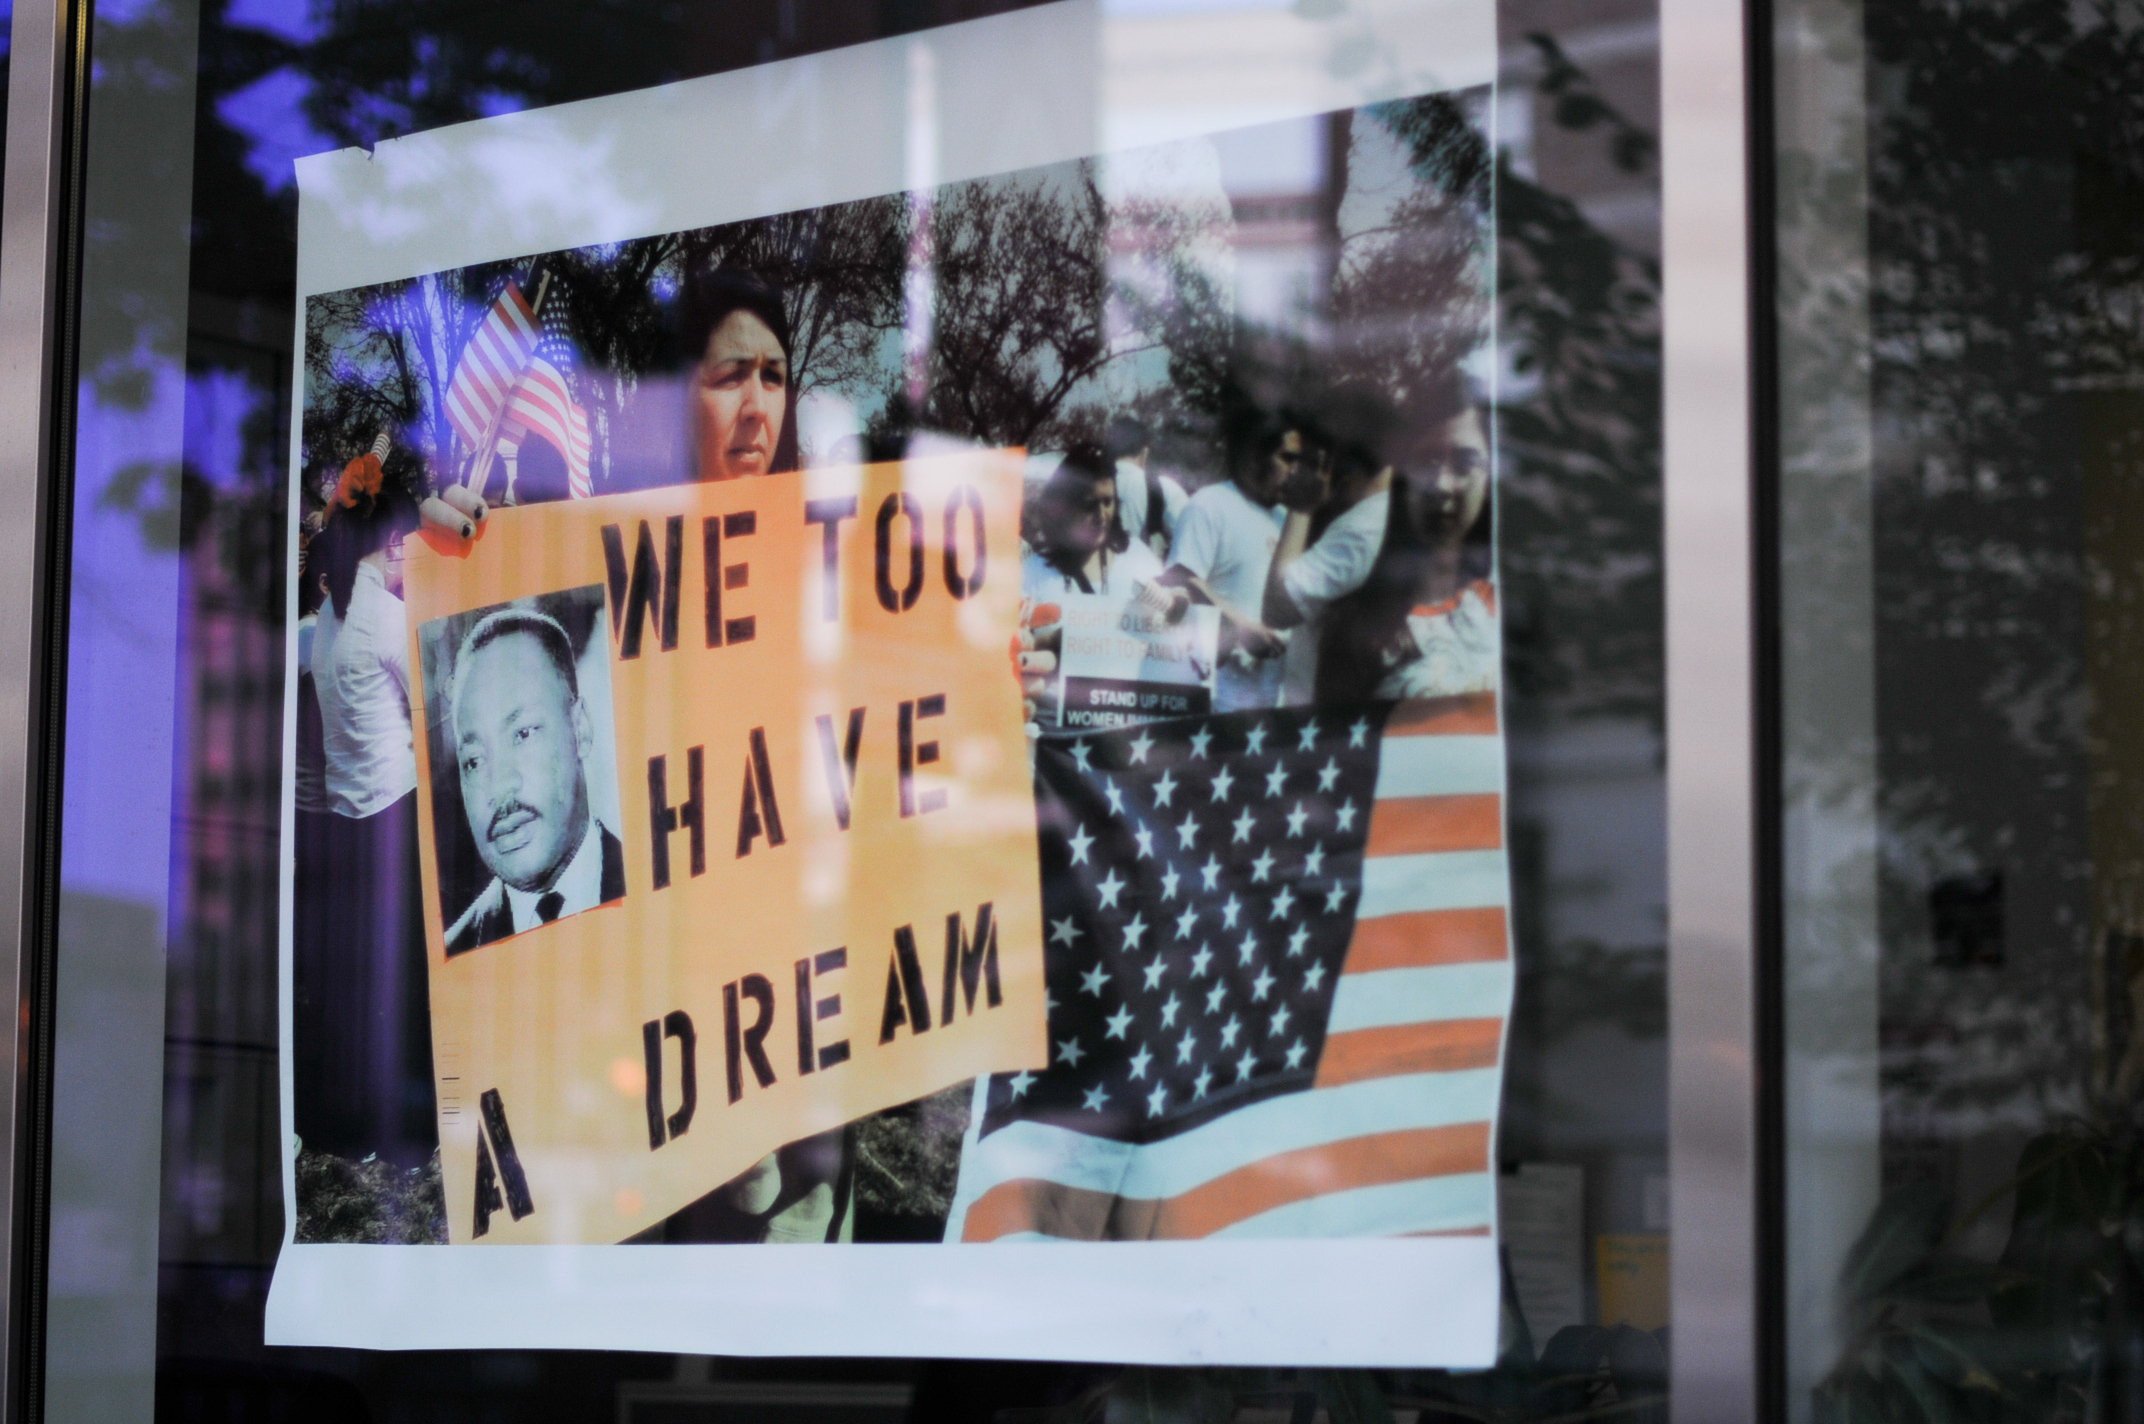 Washington, USA - July 8, 2011: The reflaction of demonstrators on a window shop. Woman carrying a pancart with the image of Dr. King and the slogan "We Too Have a Dream" in reference to woman and Litino rights.